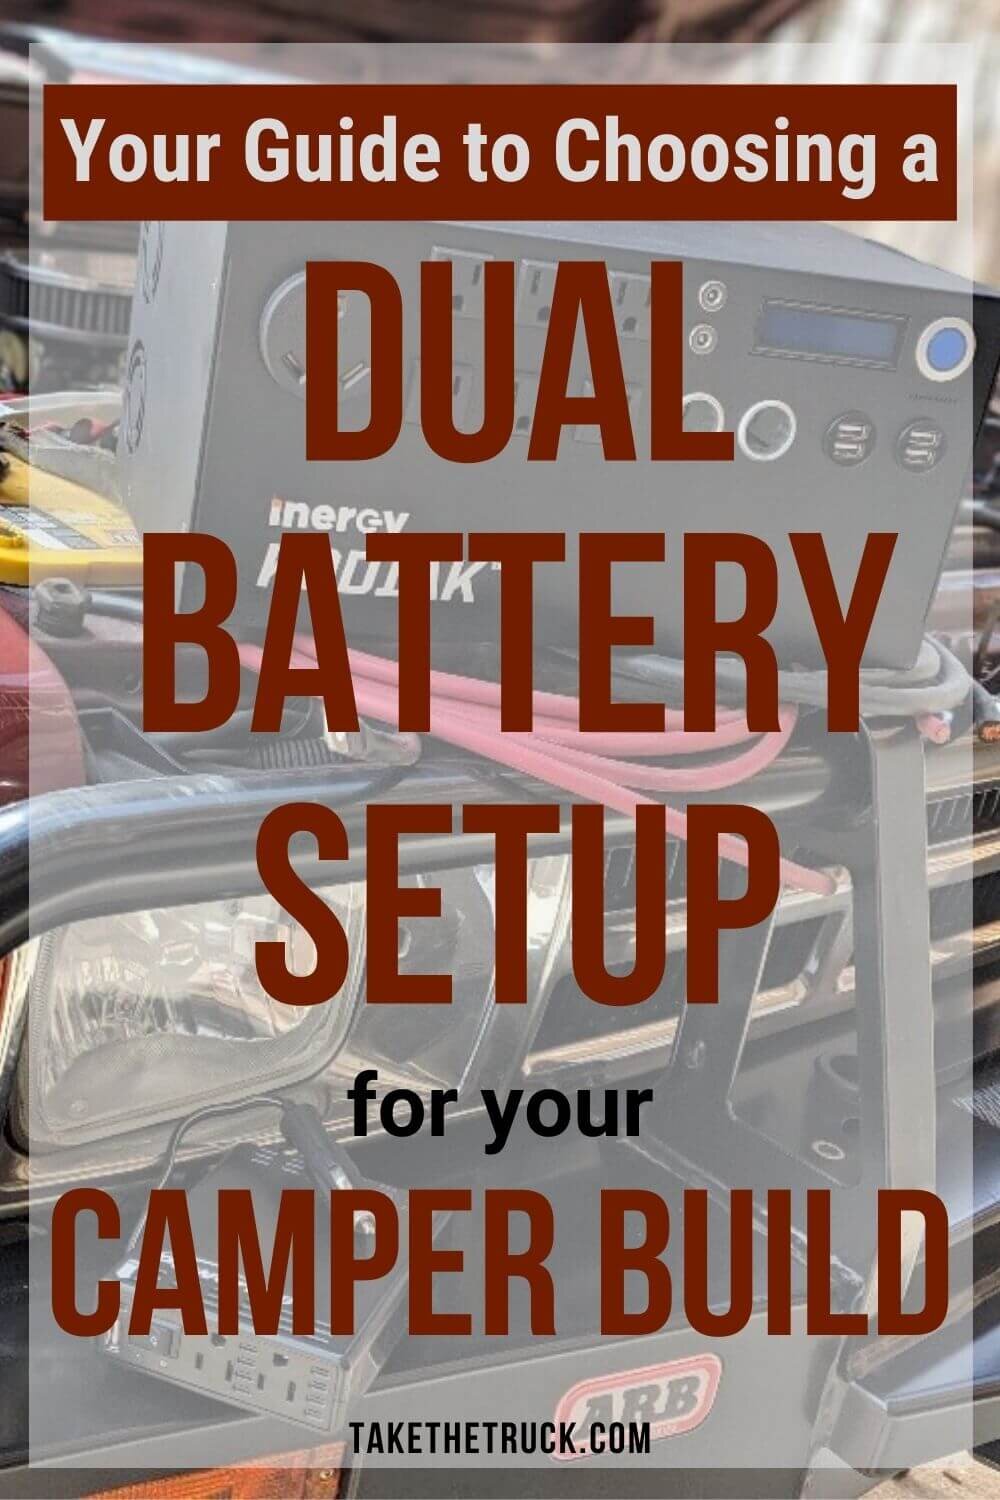 Tips and how to choose a dual battery setup for car camping, truck camping, or vanlife.